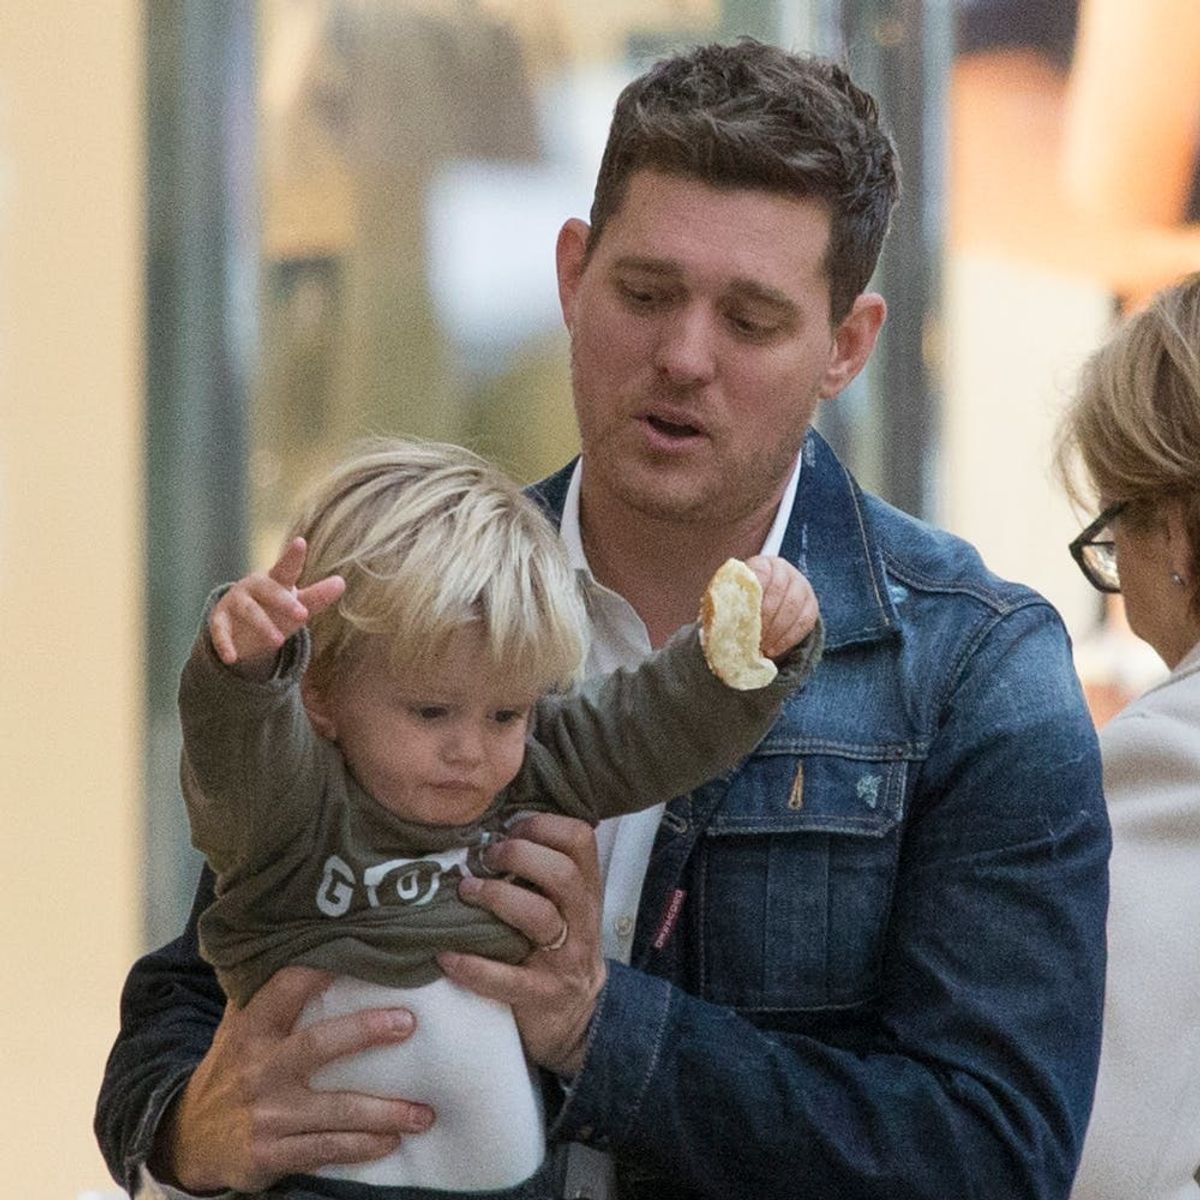 Michael Bublé Gives an Update on His Three-Year-Old Son’s Cancer Treatment Progress